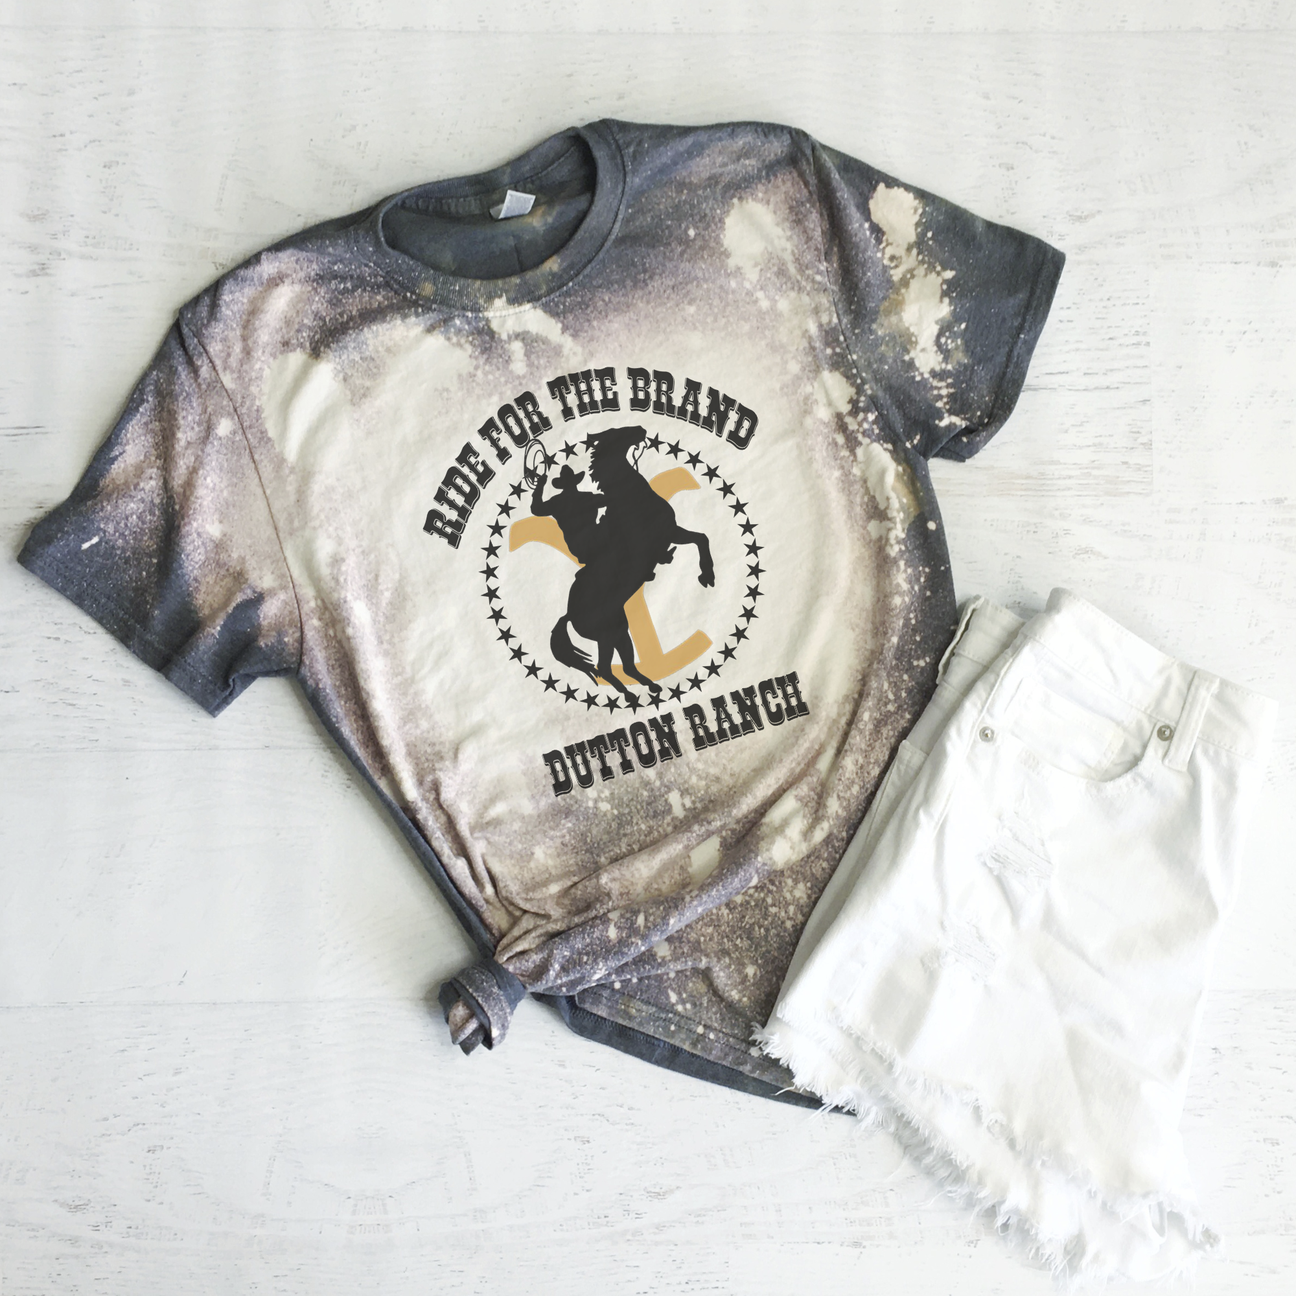 Ride for the brand Yellowstone bleached tee